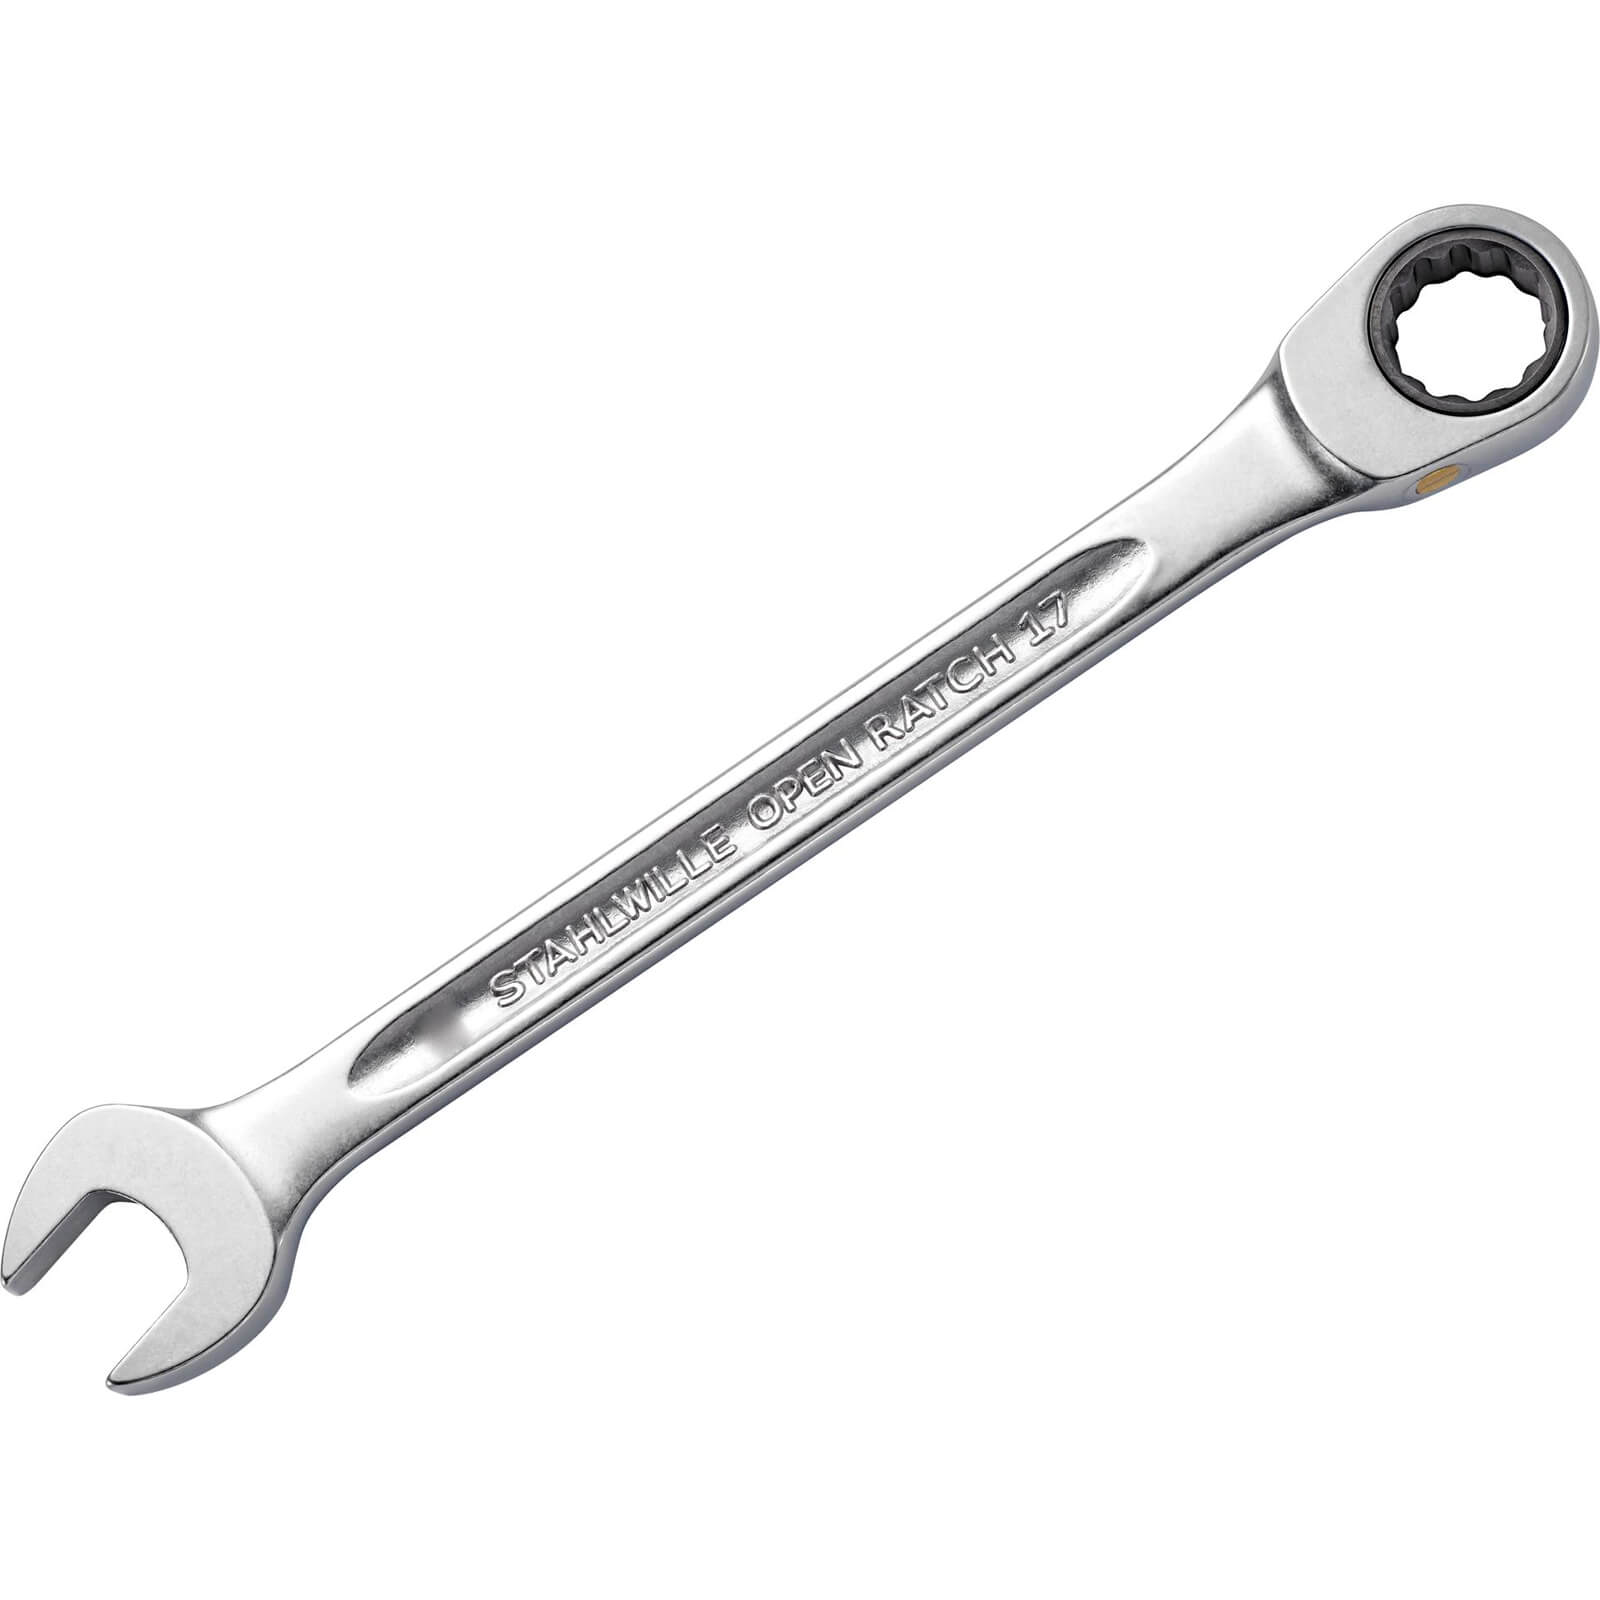 Image of Stahlwille 17F Ratchet Combination Spanner 18mm